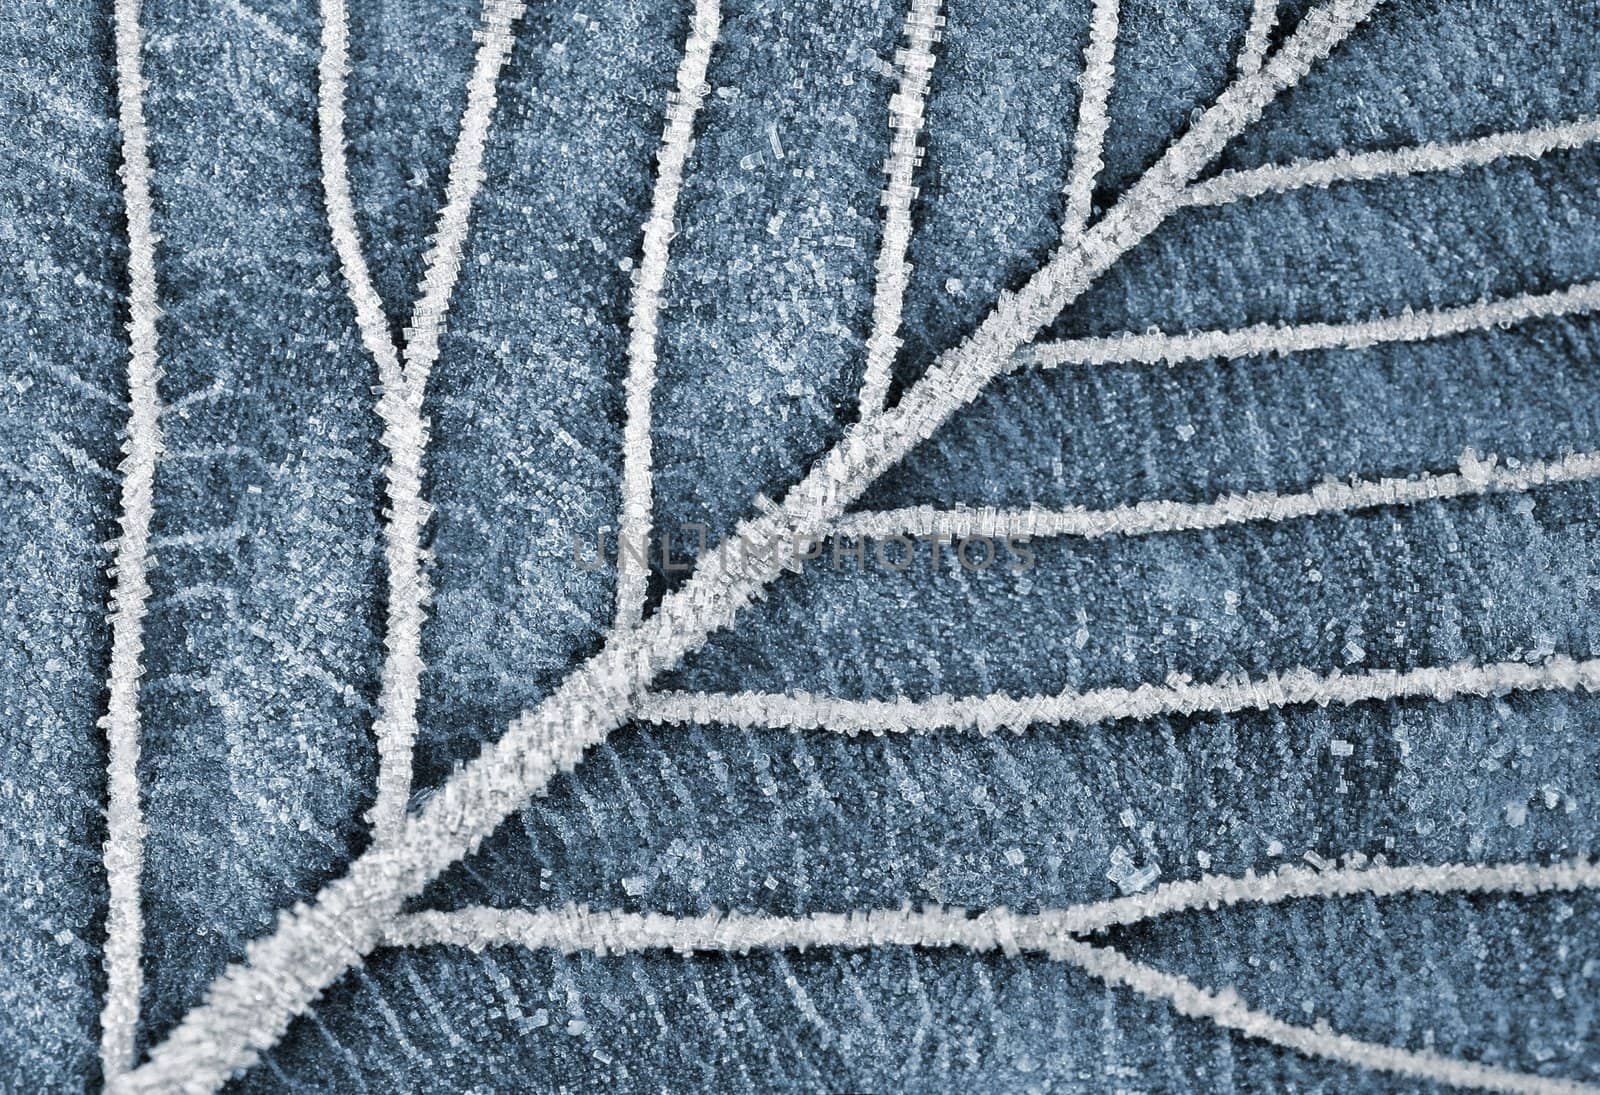 Abstract nature shot of frozen autumn leave. Verry Cool.